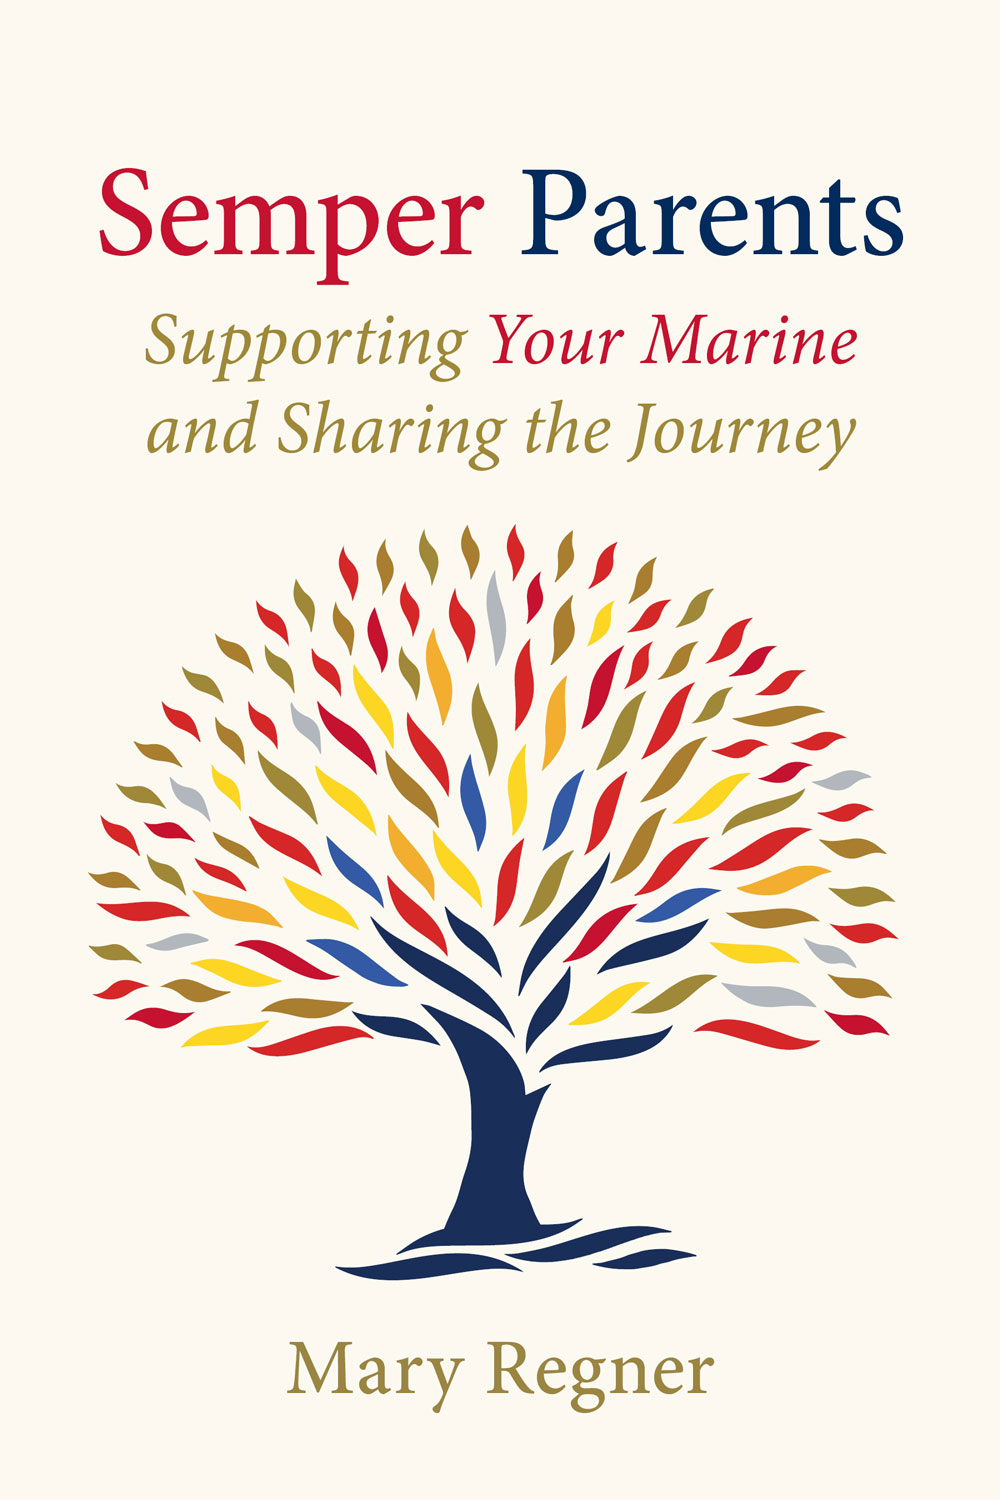 Semper Parents: Supporting Your Marine and Sharing the Journey by Mary Regner